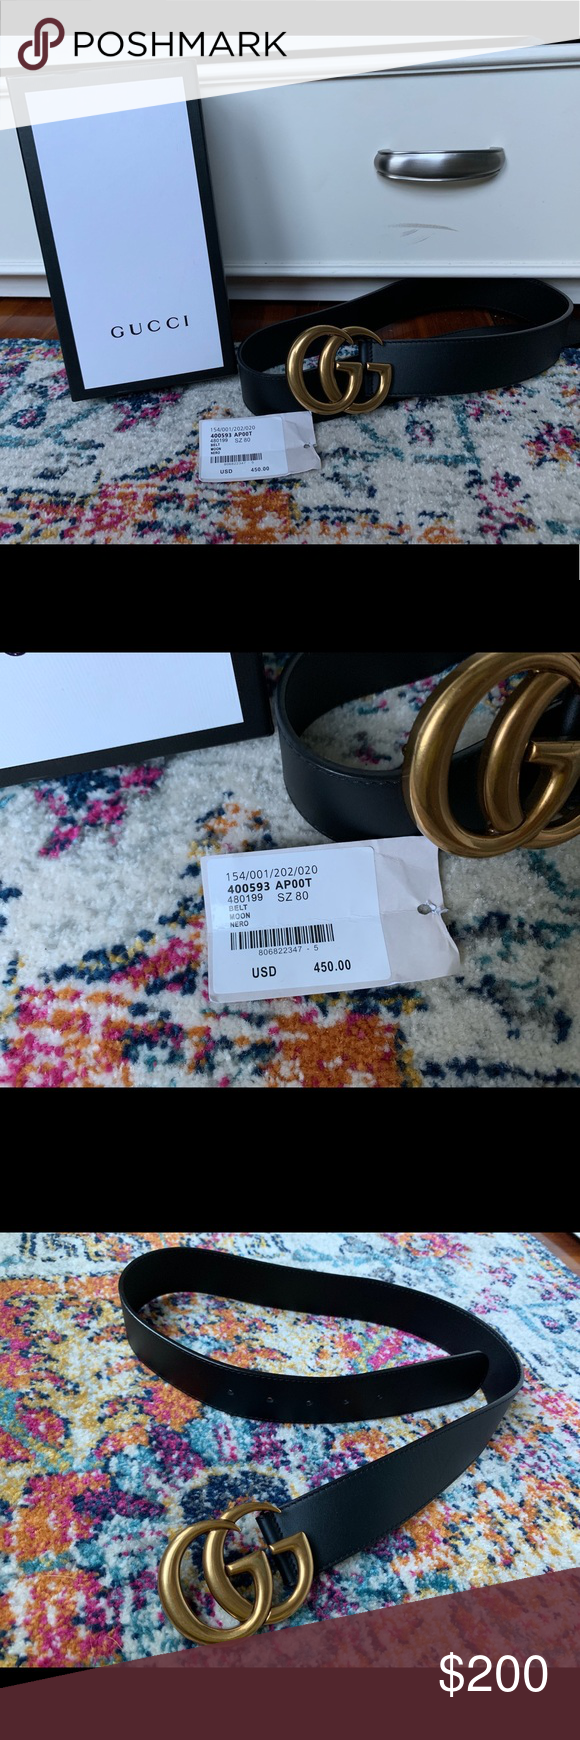 gucci serial number checker belt